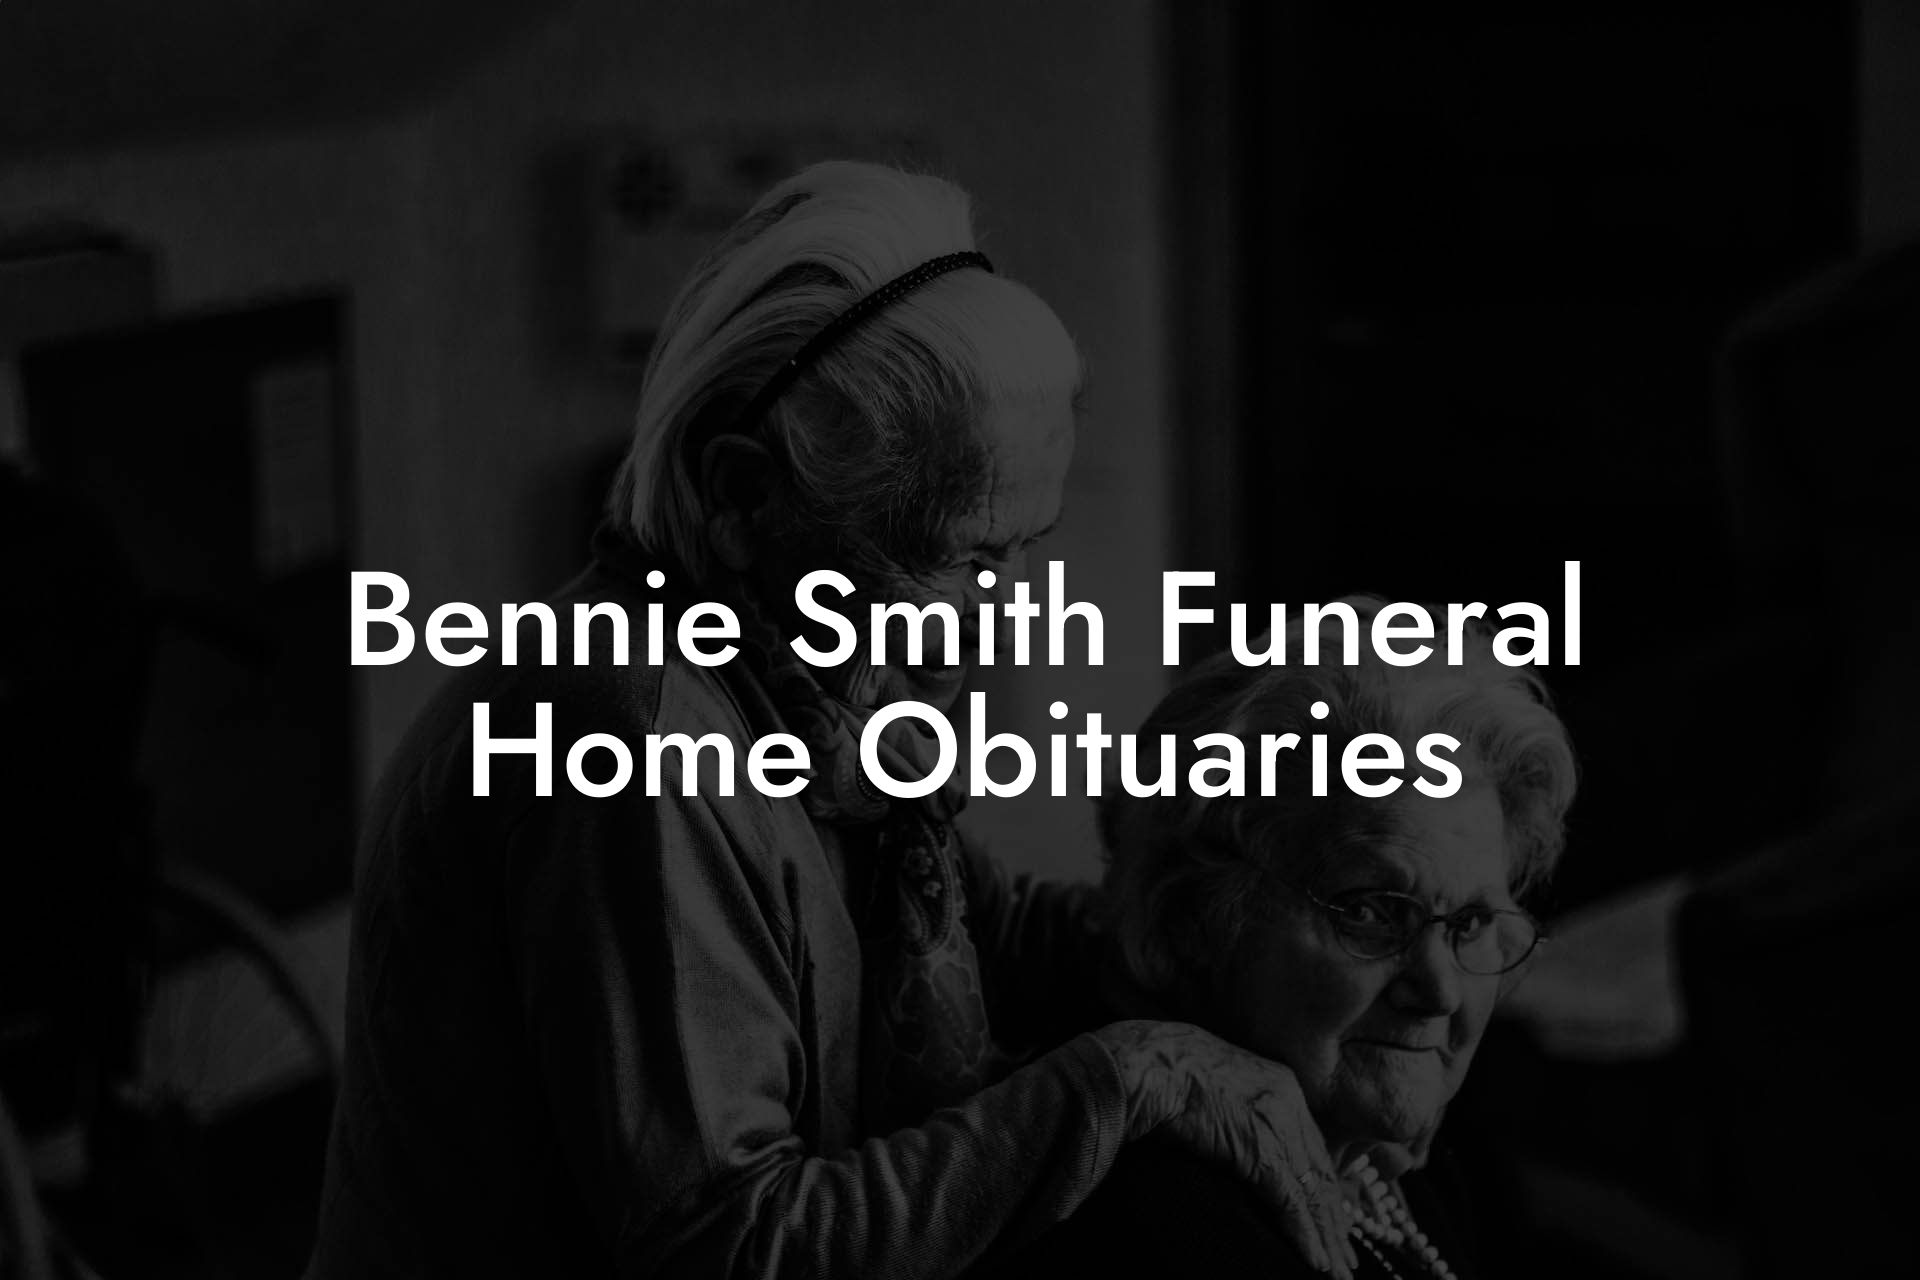 Bennie Smith Funeral Home Obituaries